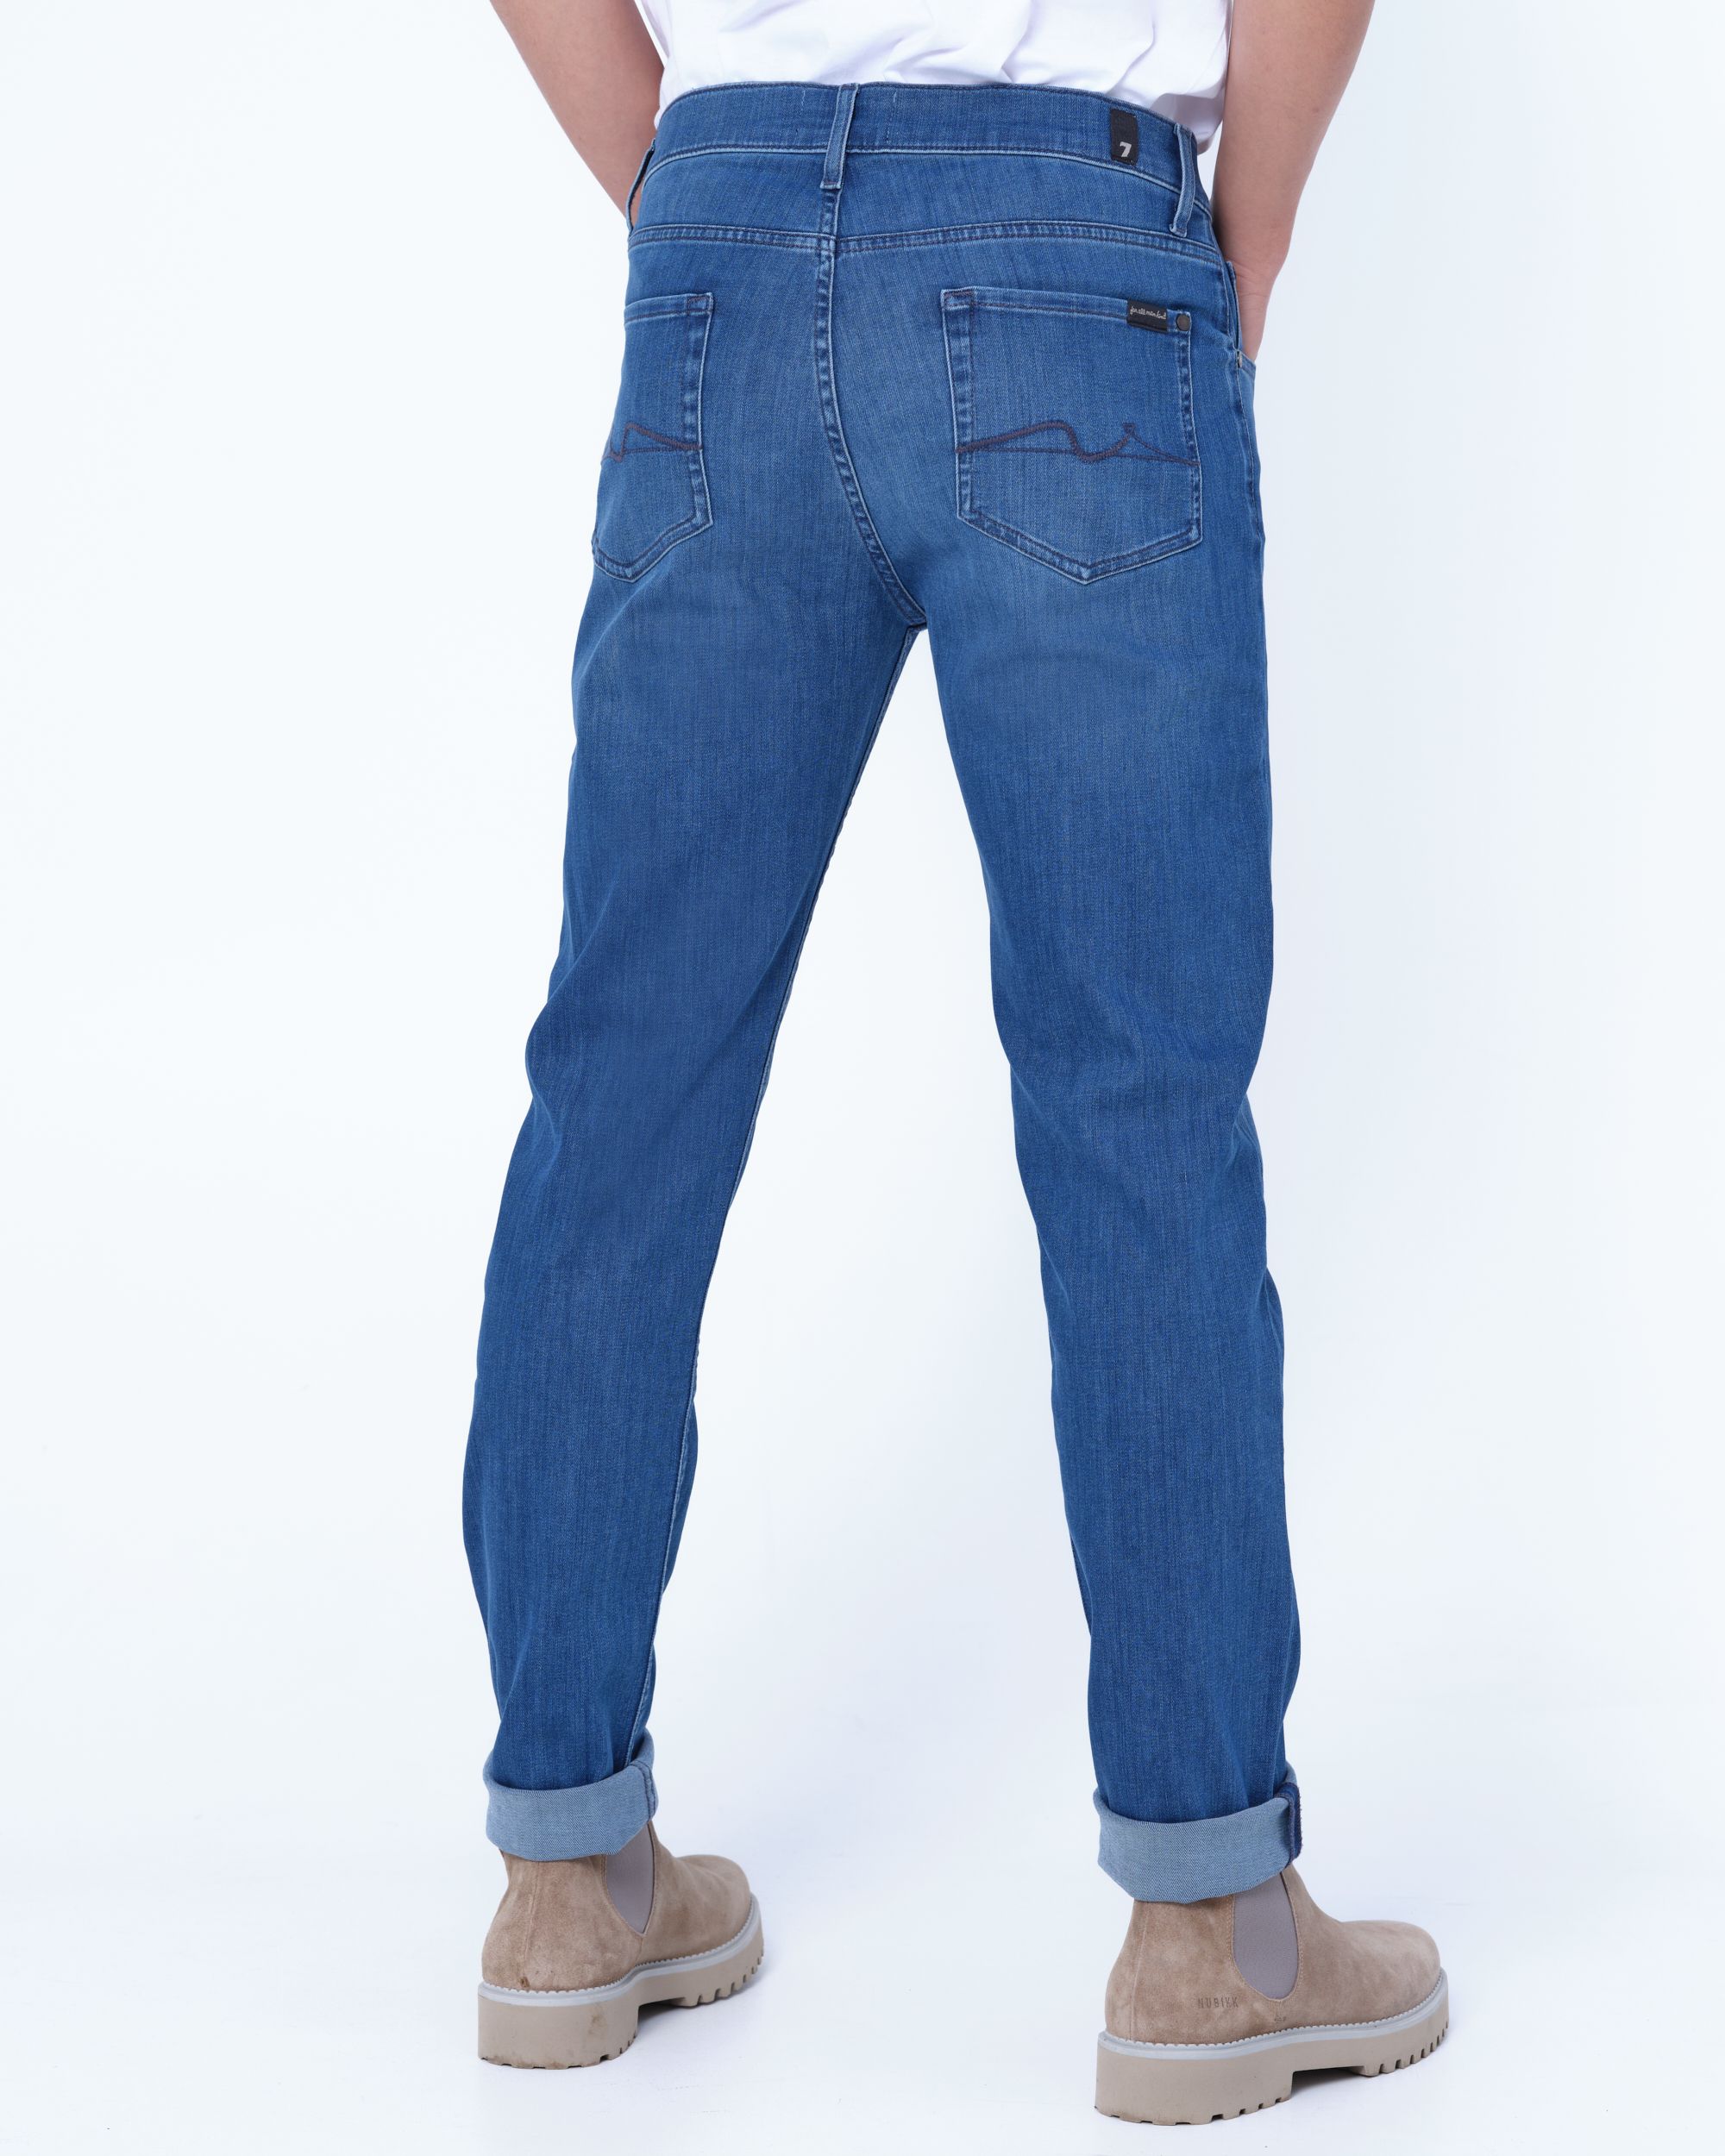 Seven for all mankind Jeans Blauw 083794-001-30